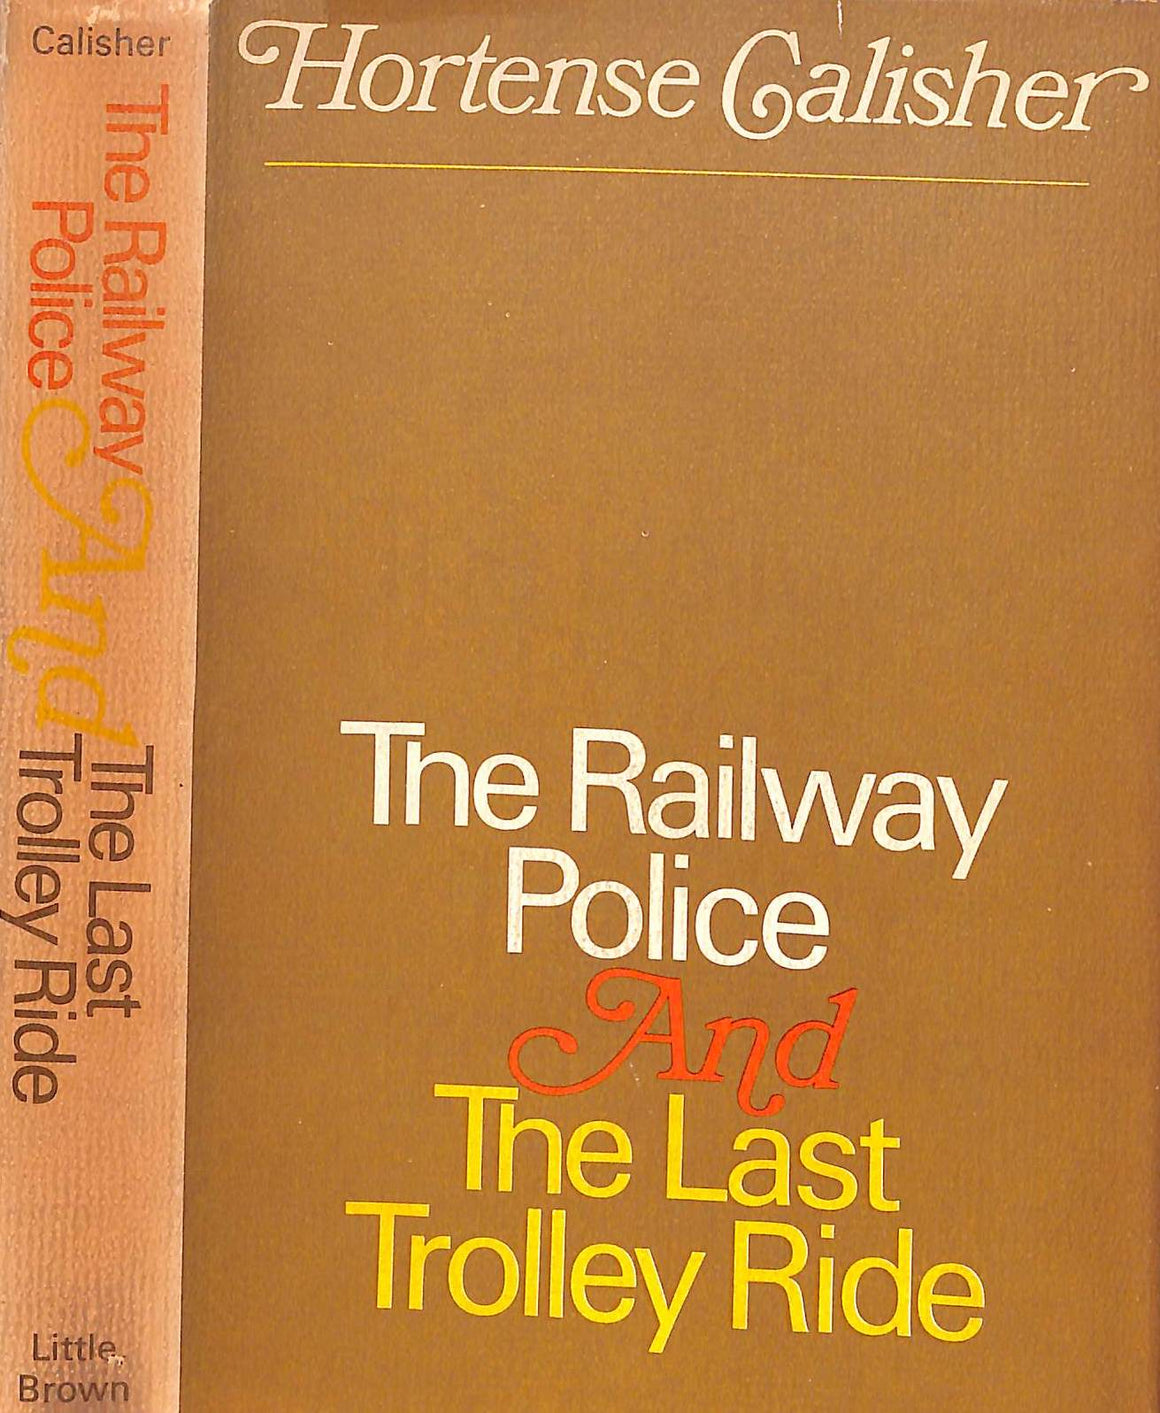 "The Railway Police And The Last Trolley Ride" 1966 CALISHER, Hortense